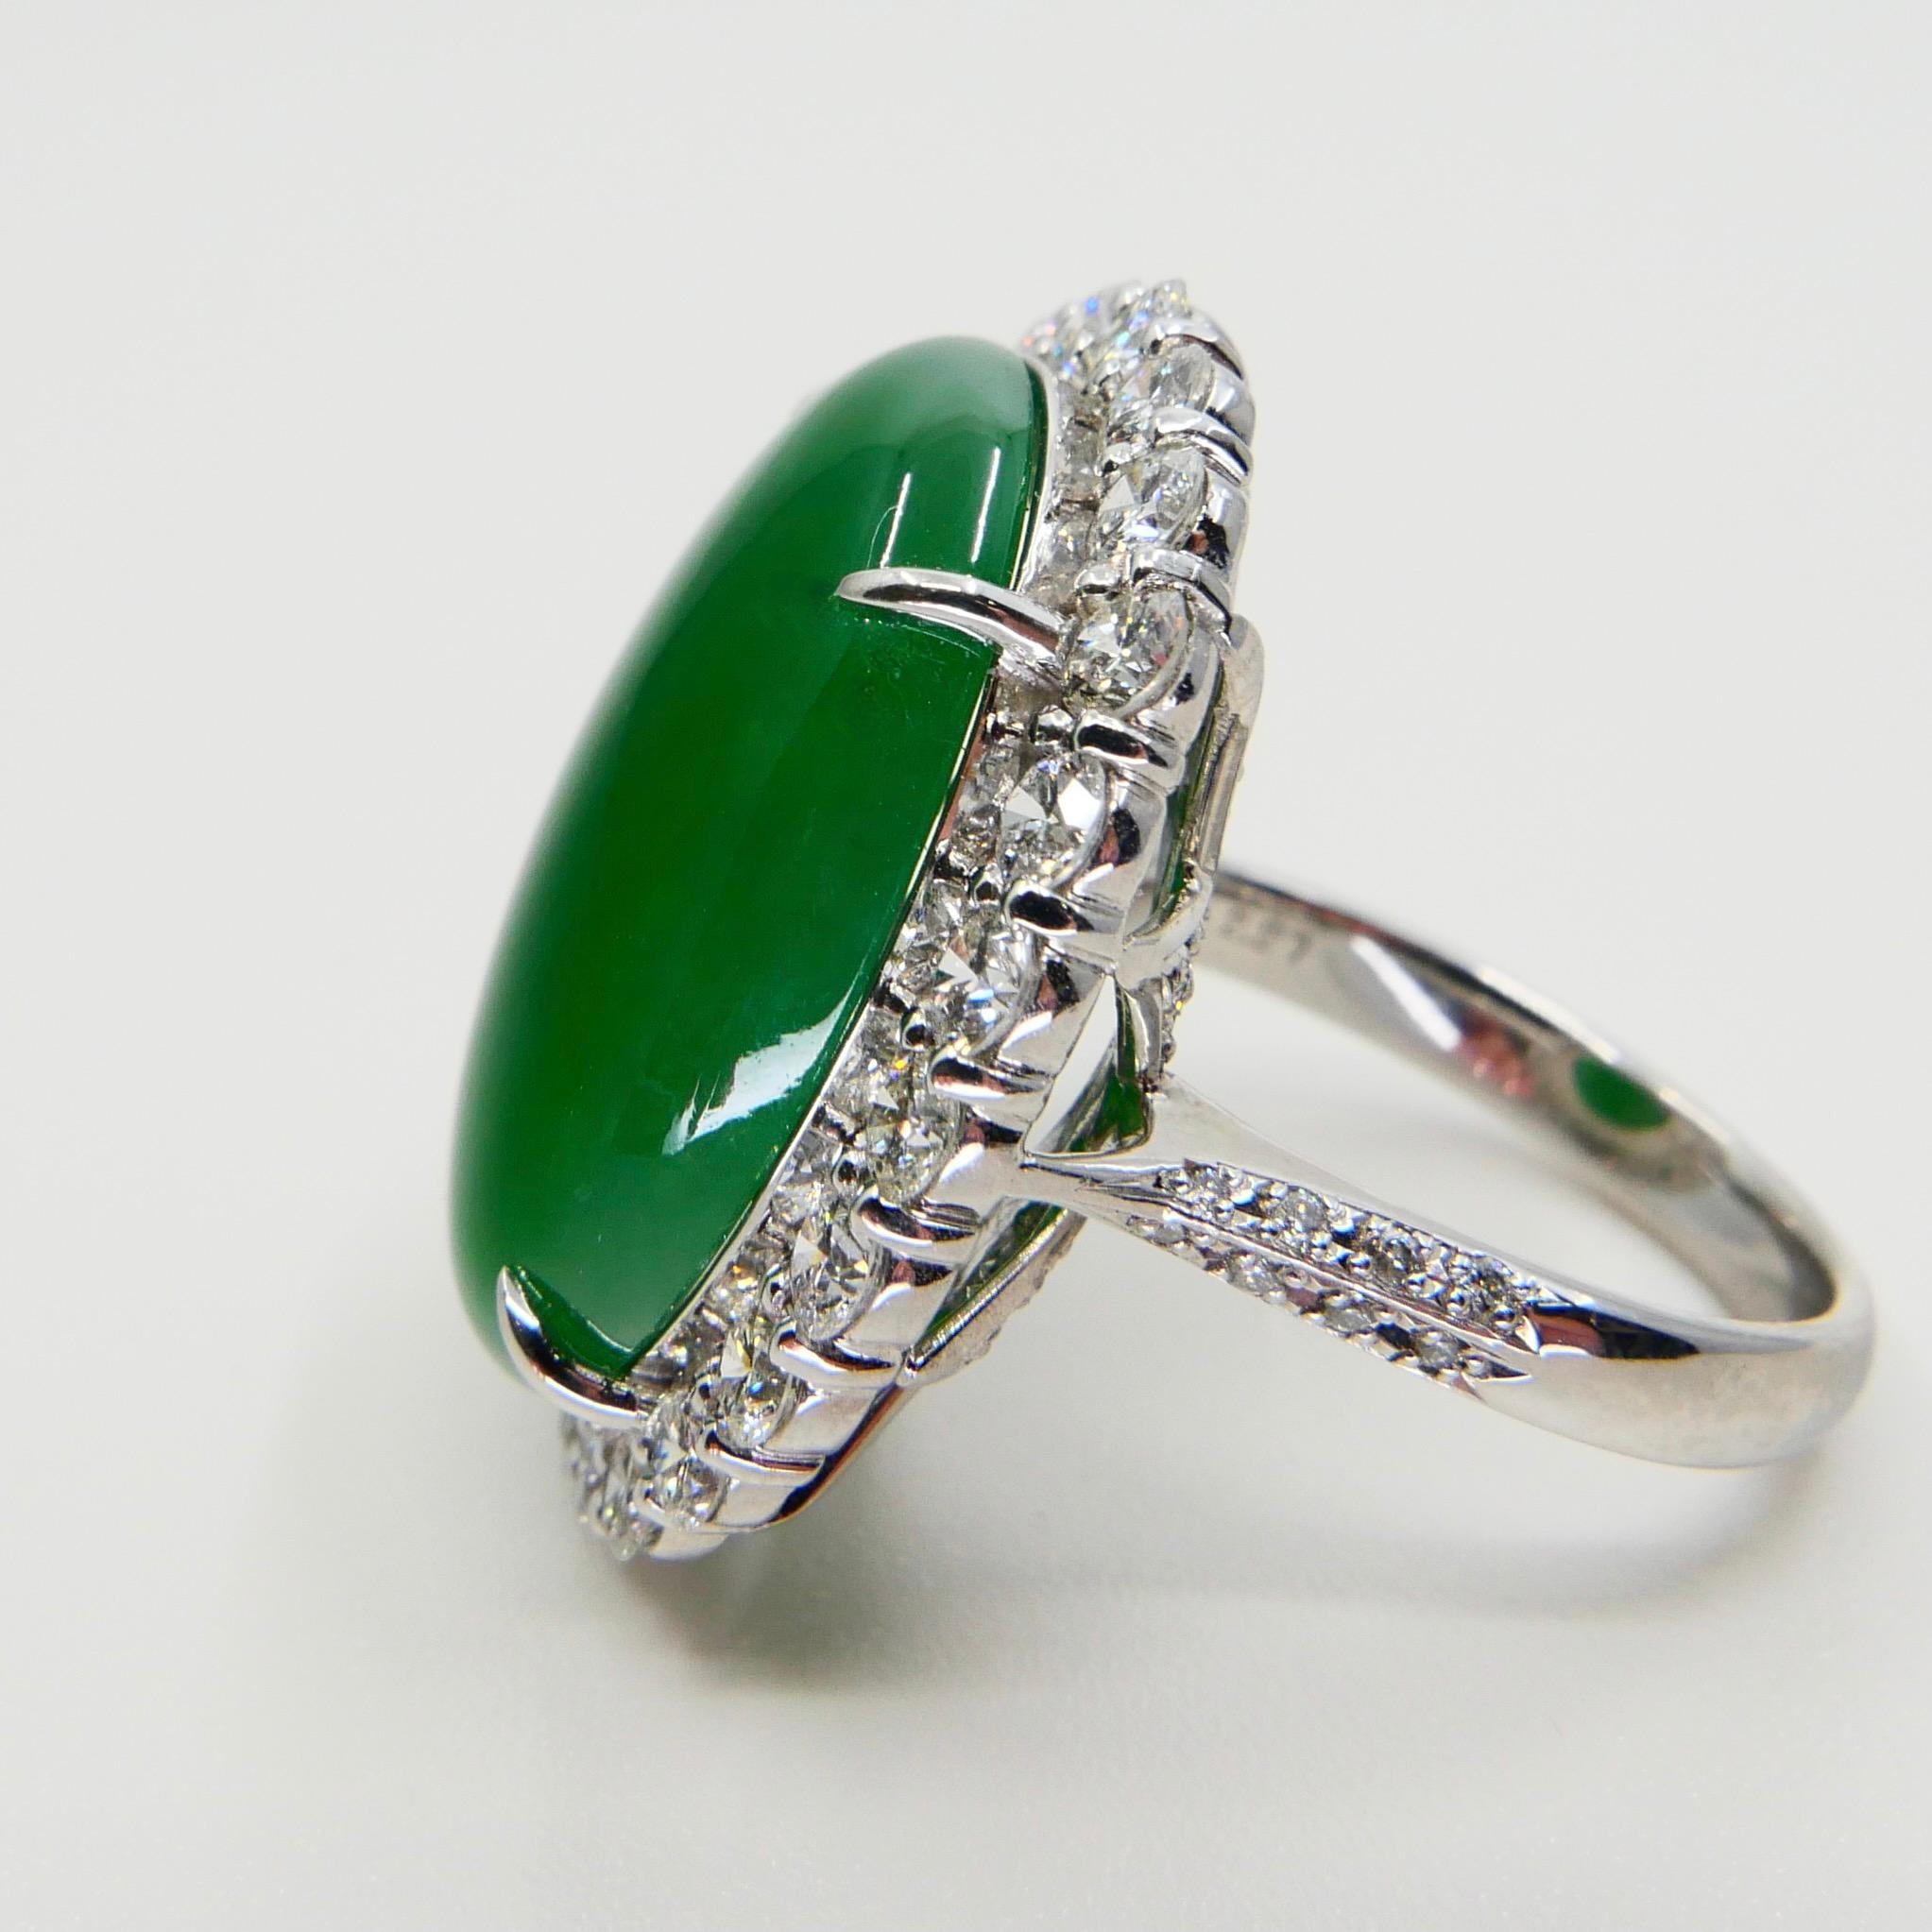 Certified 21 Cts Jade & Diamond Cocktail Ring, Intense Apple Green, Massive 9